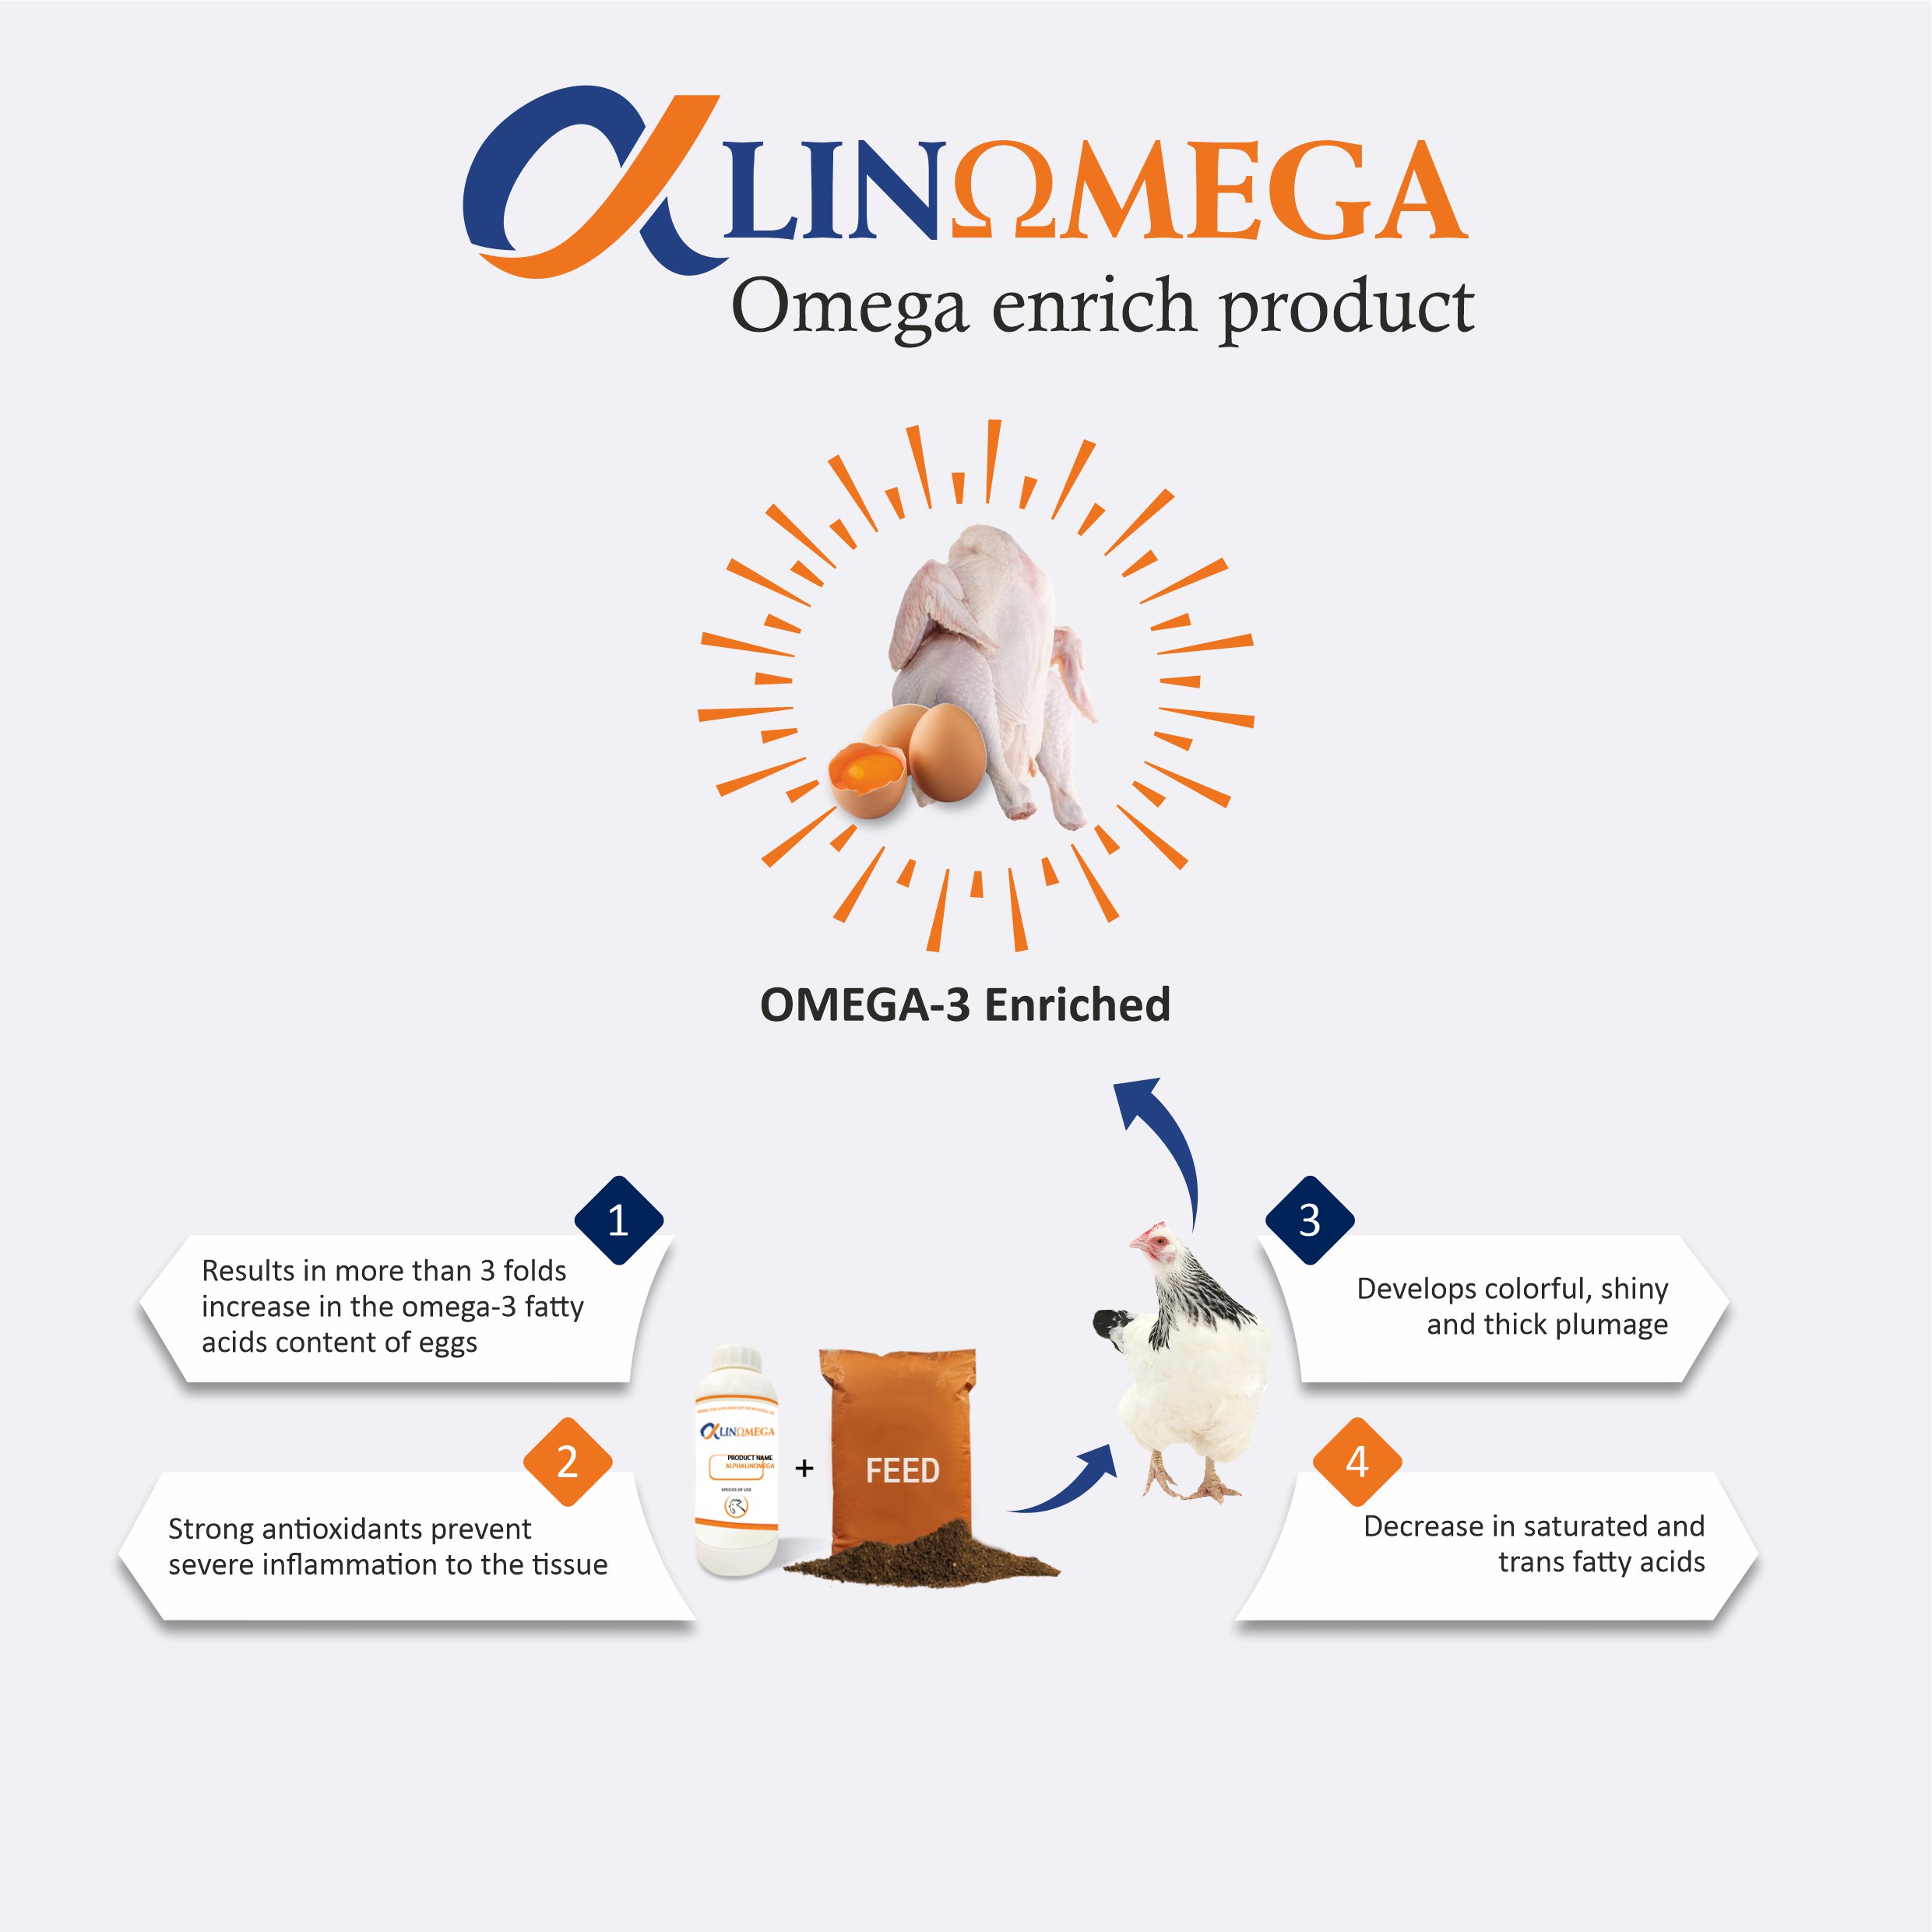 Alphalinomega MOA - omega supplement for poultry - liquid omega for chicken - Poultry Omega fatty acids - Natural Poultry Feed supplements in India - Vinayak